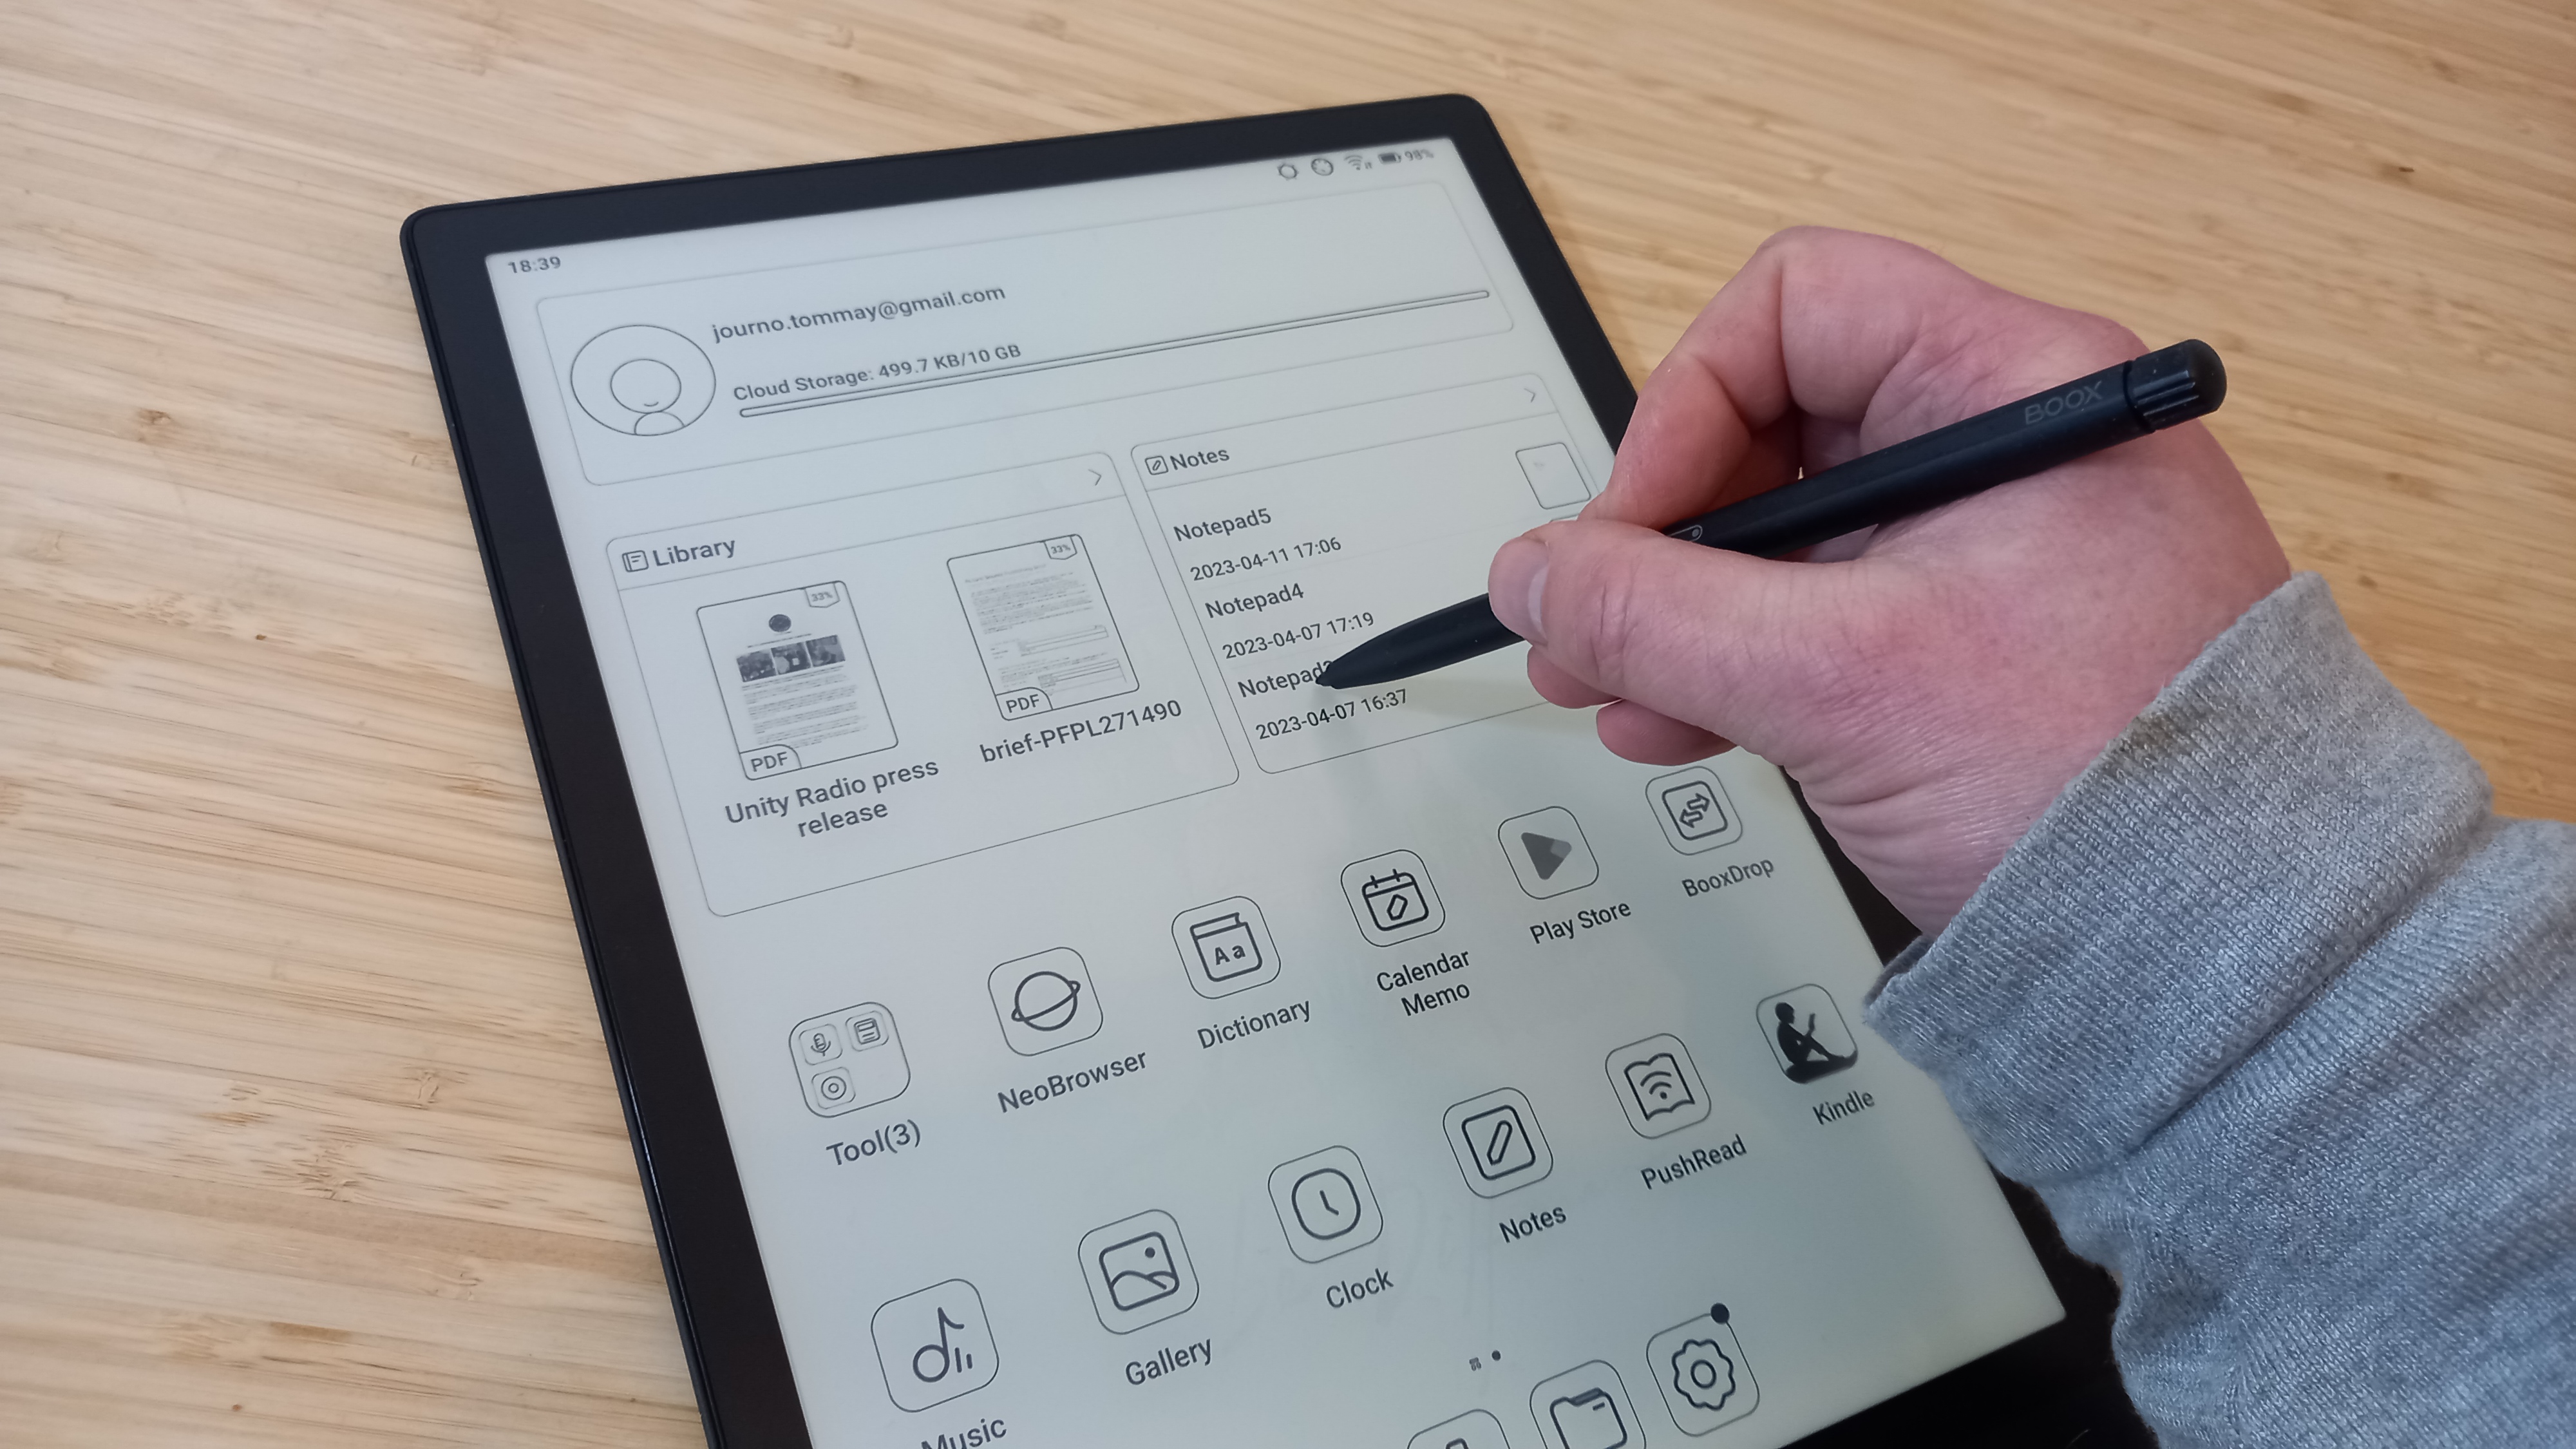 Onyx Boox Tab X review: e-ink tablet goes big on specs and